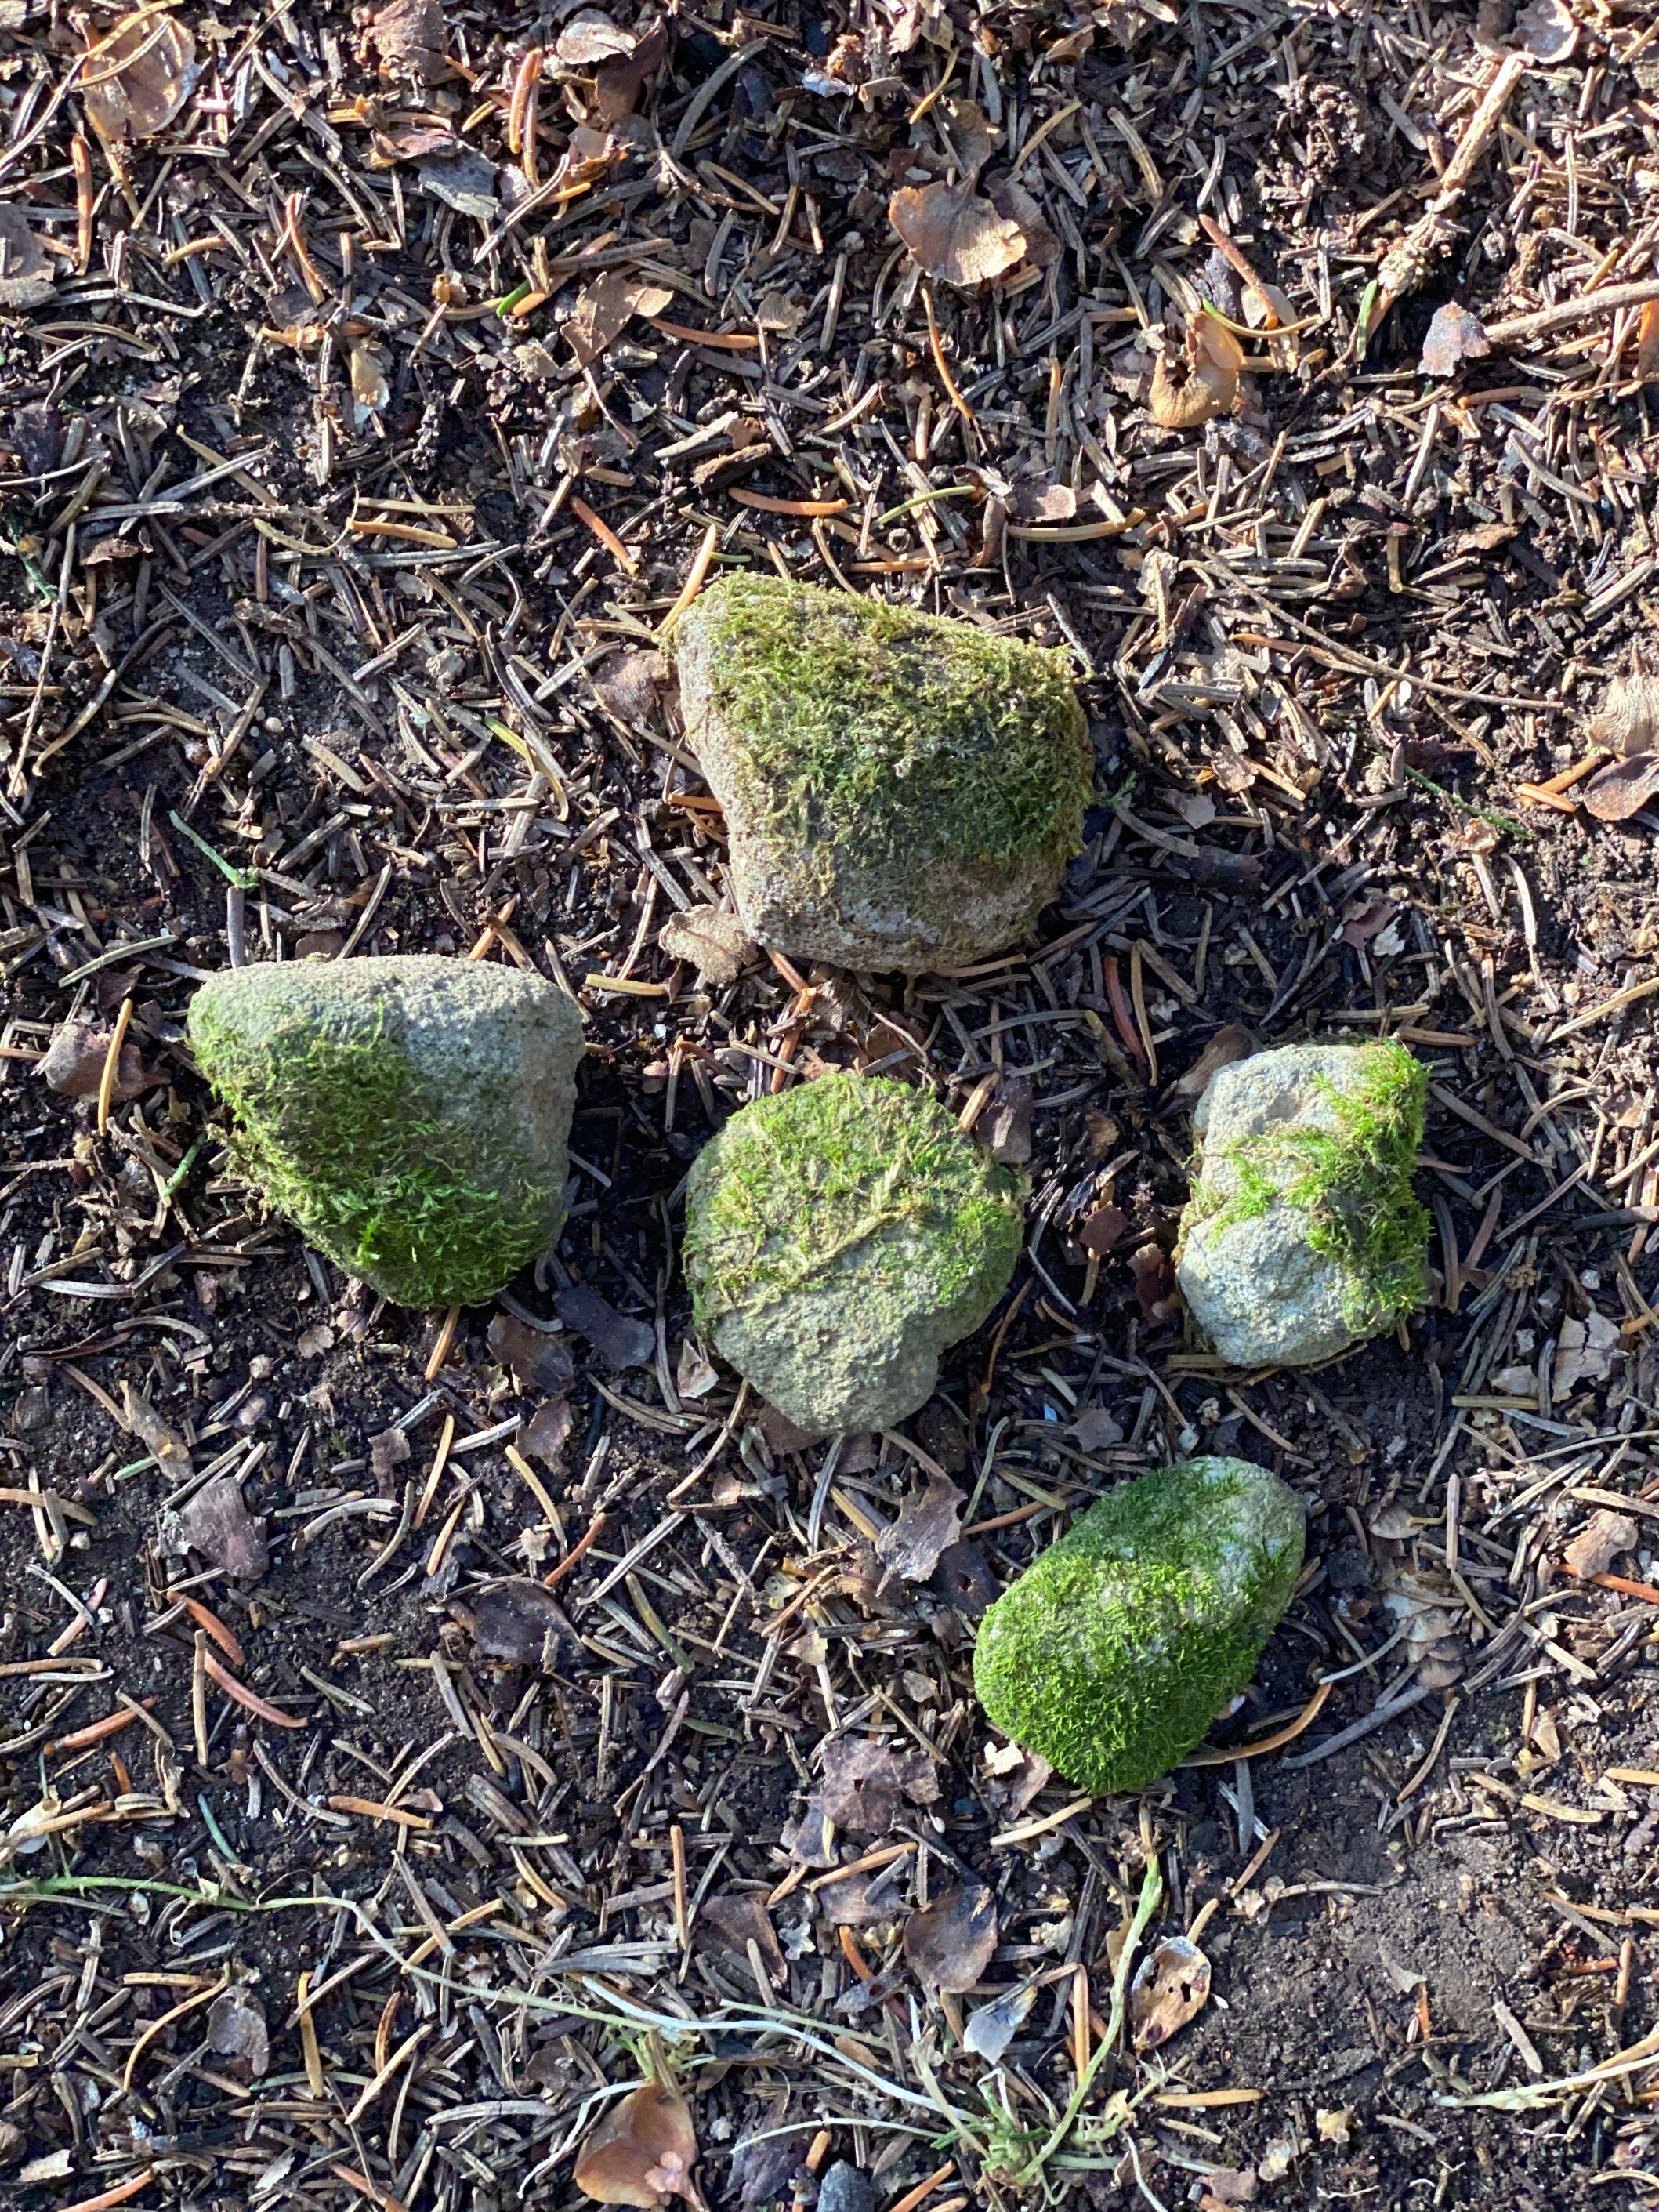 Mossy Rocks, Five Moss Covered Stones, About 1-2 Inches in Size